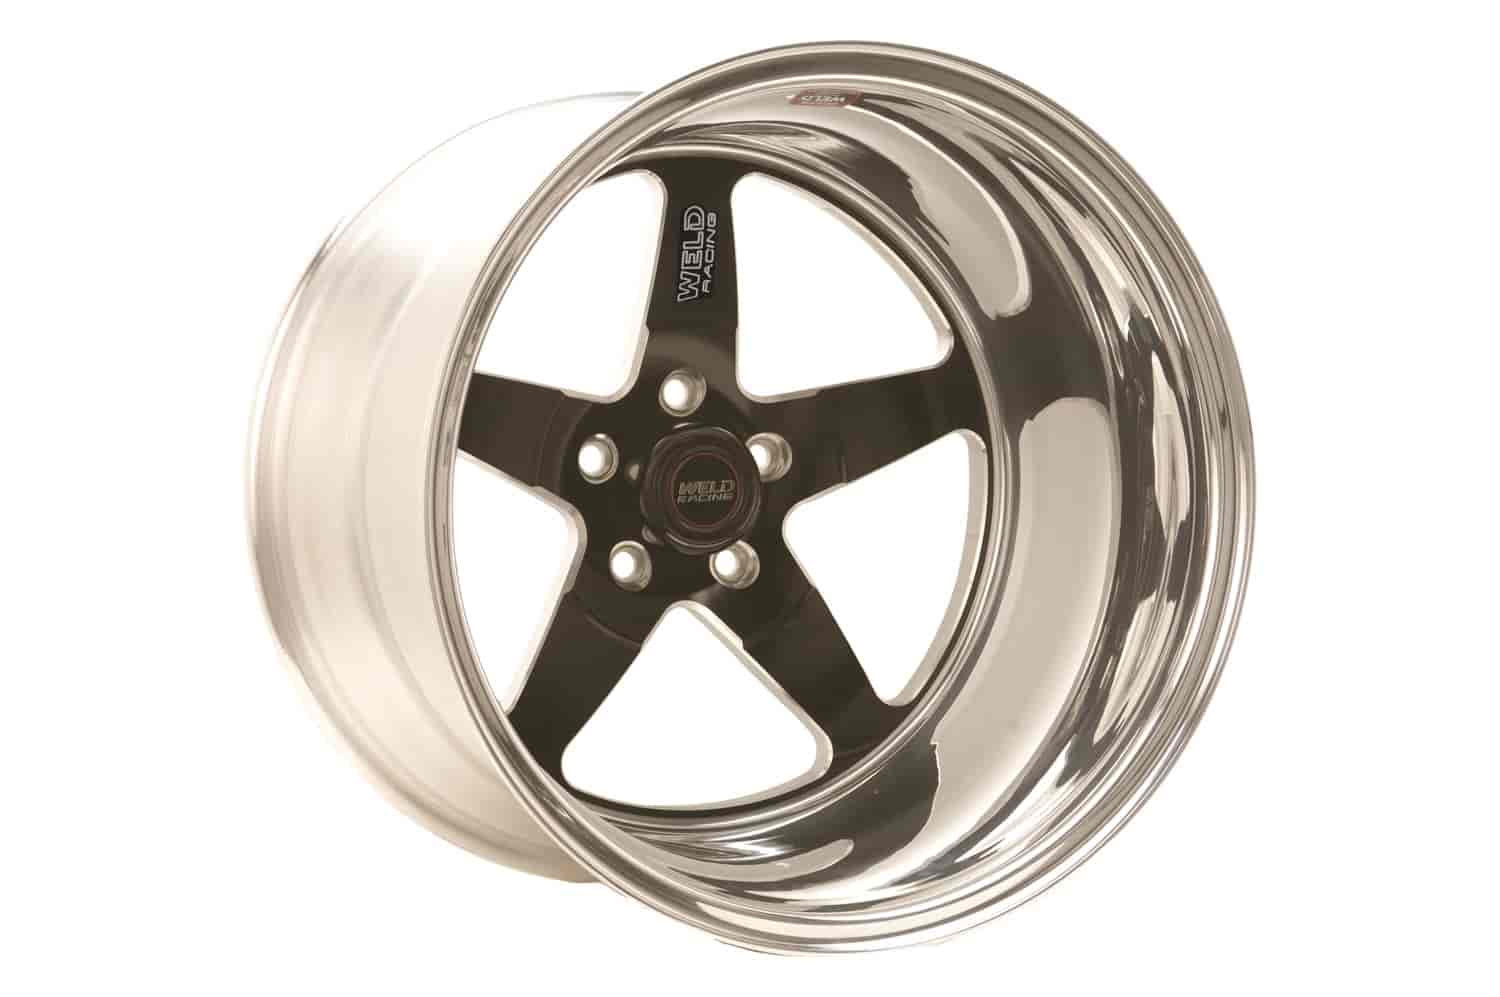 RT-S Series S71 Wheel Size: 15" x 8" Bolt Circle: 5 x 4-3/4" Back Space: 5-1/2"